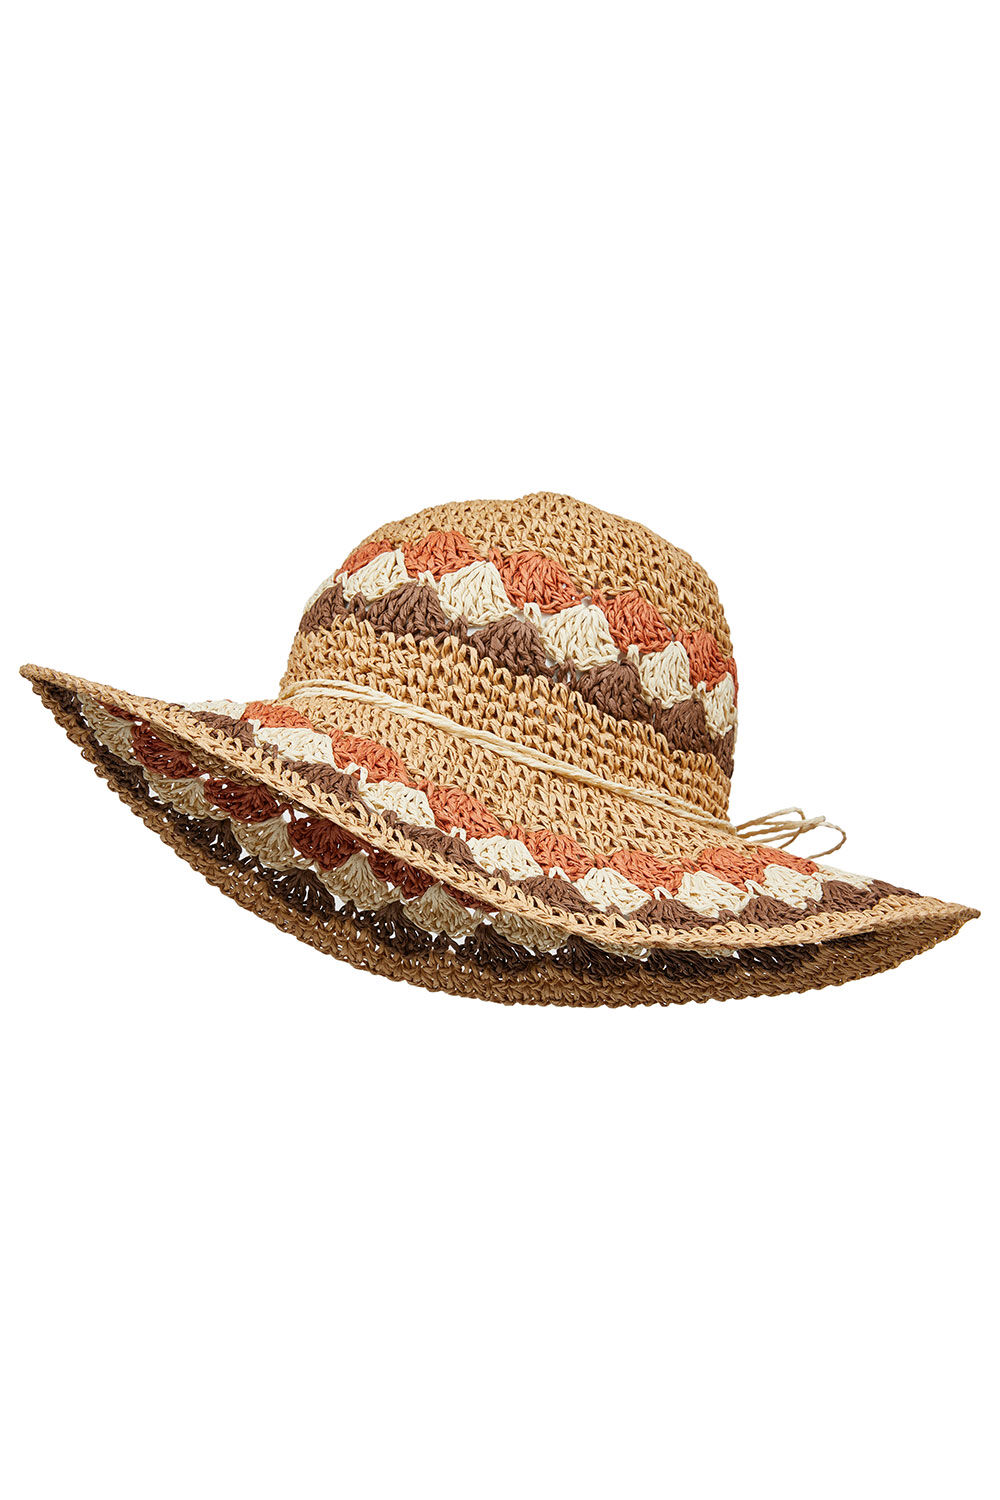 Bonmarche Brown/Cream Beach Hat With ed Weave, Size: One Size